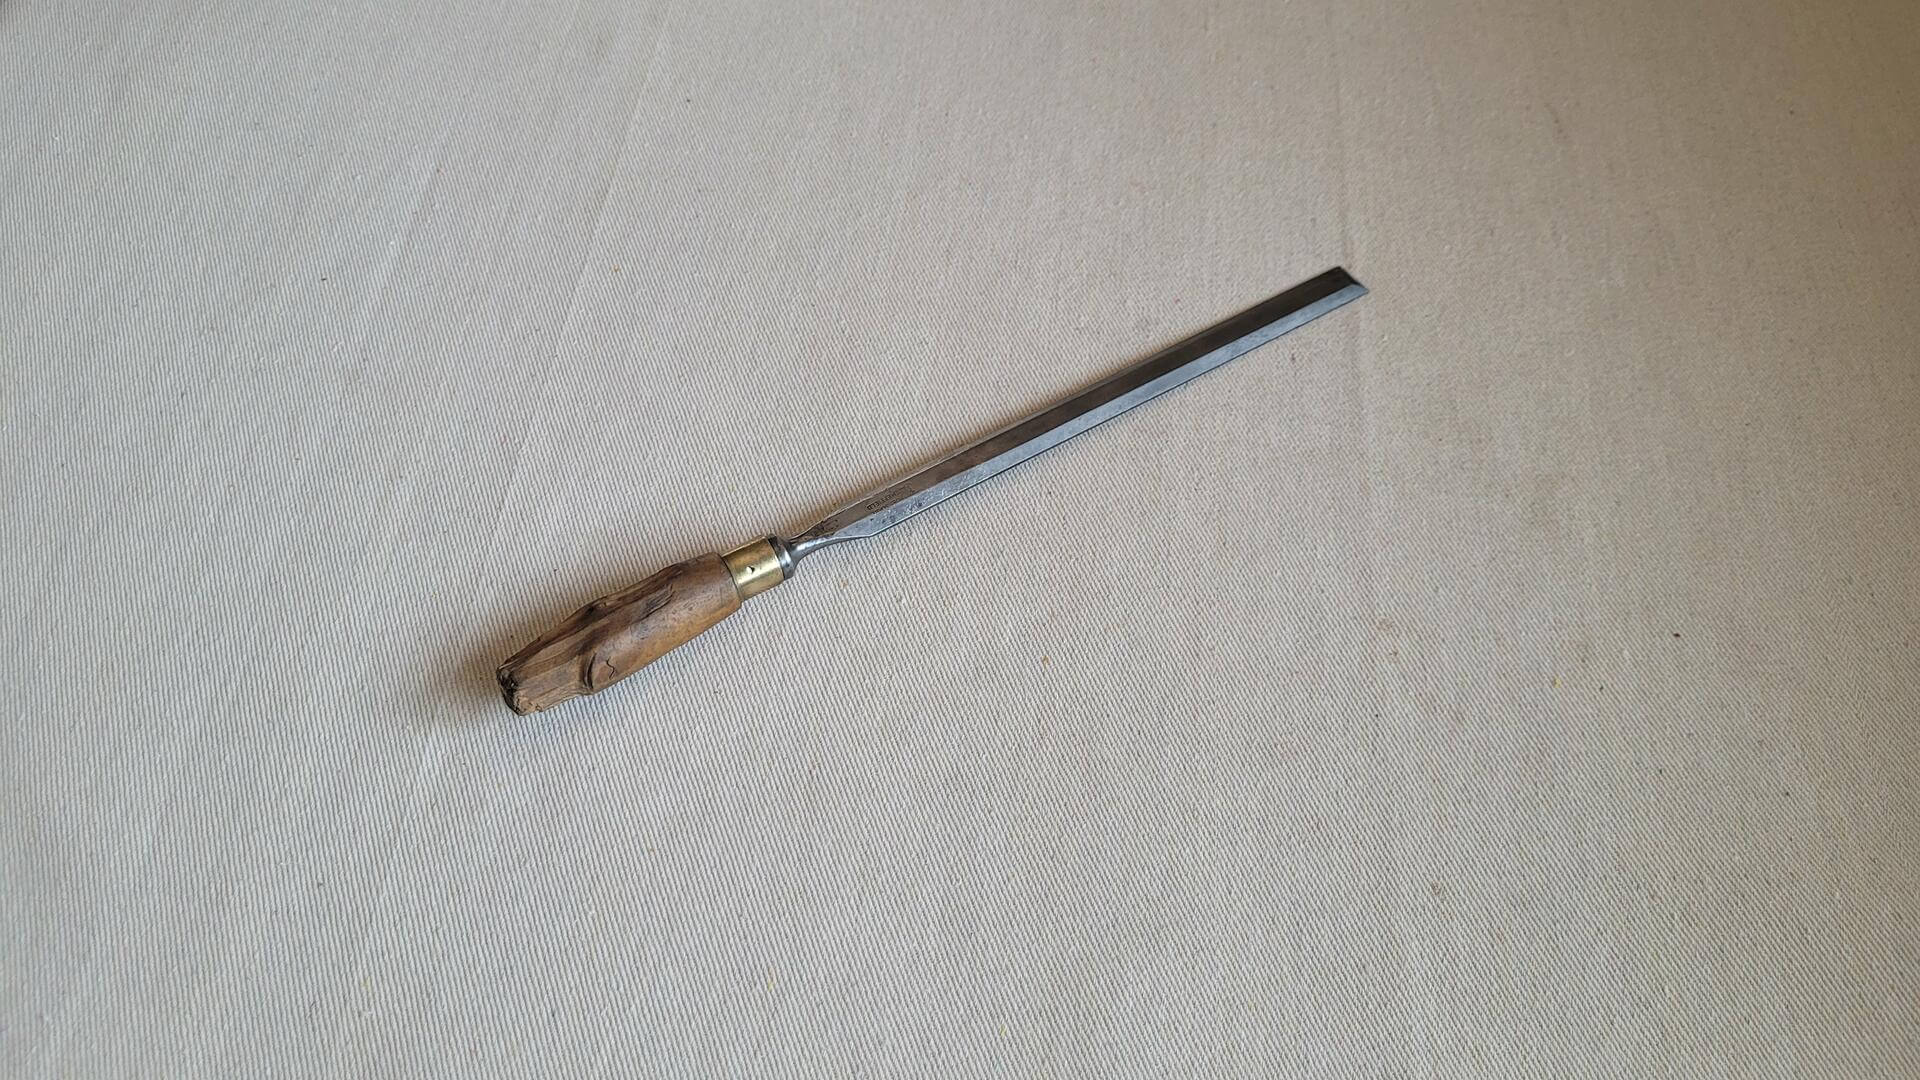 Antique Robi Sorby 1/2" paring chisel 8 inch thin blade. Vintage made in Sheffield England collectible cabinet maker woodworking and carpentry hand tools